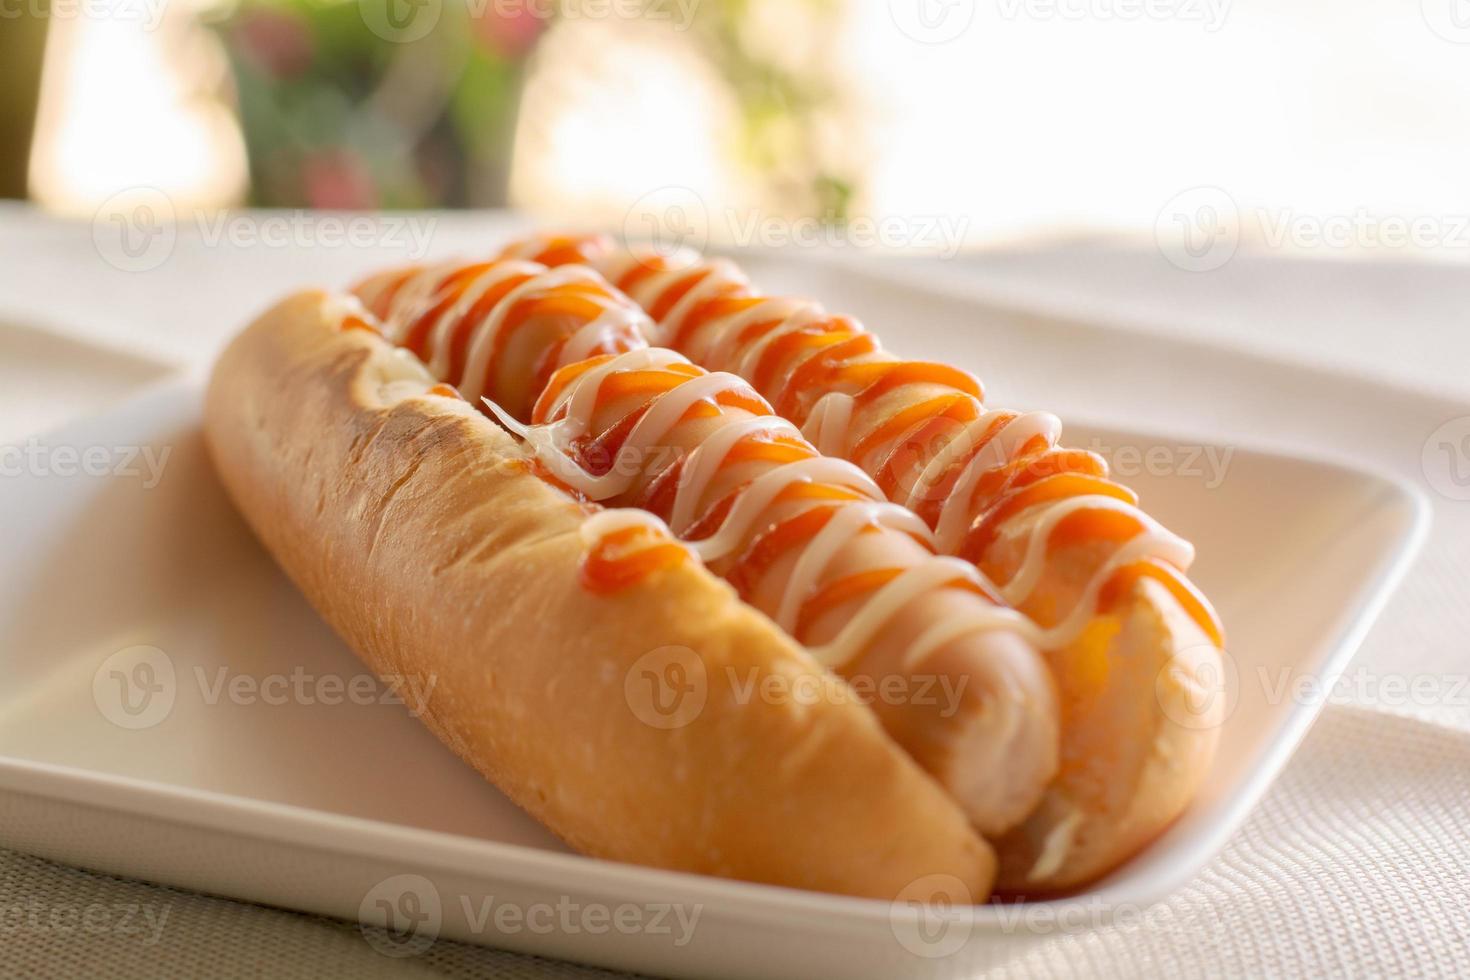 Hot dog with bun and ketchup, mayonnaise on white plate. Sausage sandwich for lunch. Fast food concept. photo